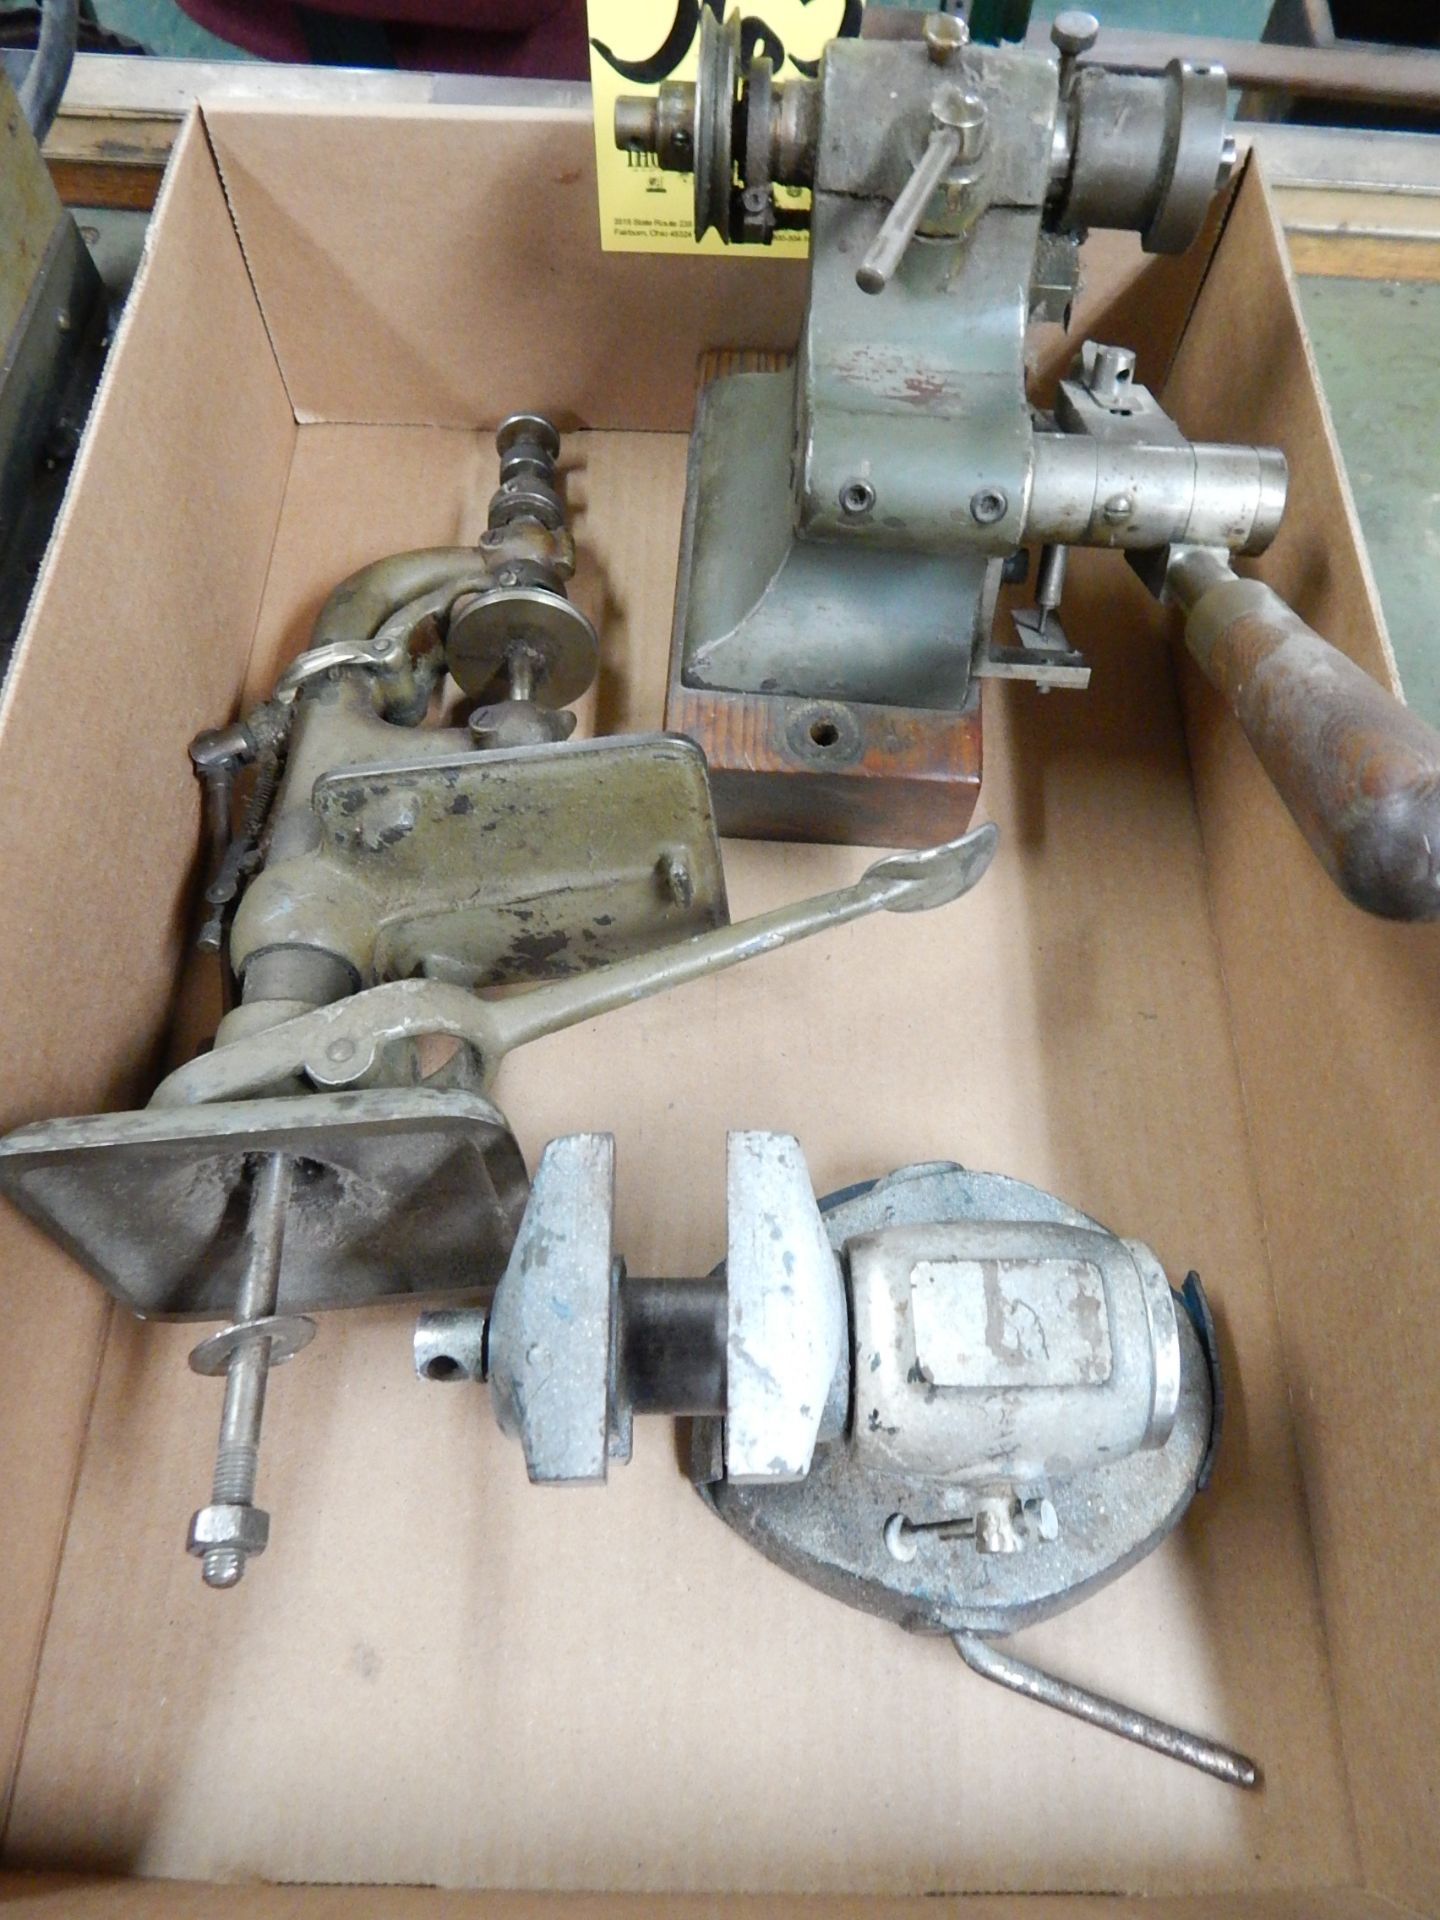 Press, Vise and Cut-Off Tool